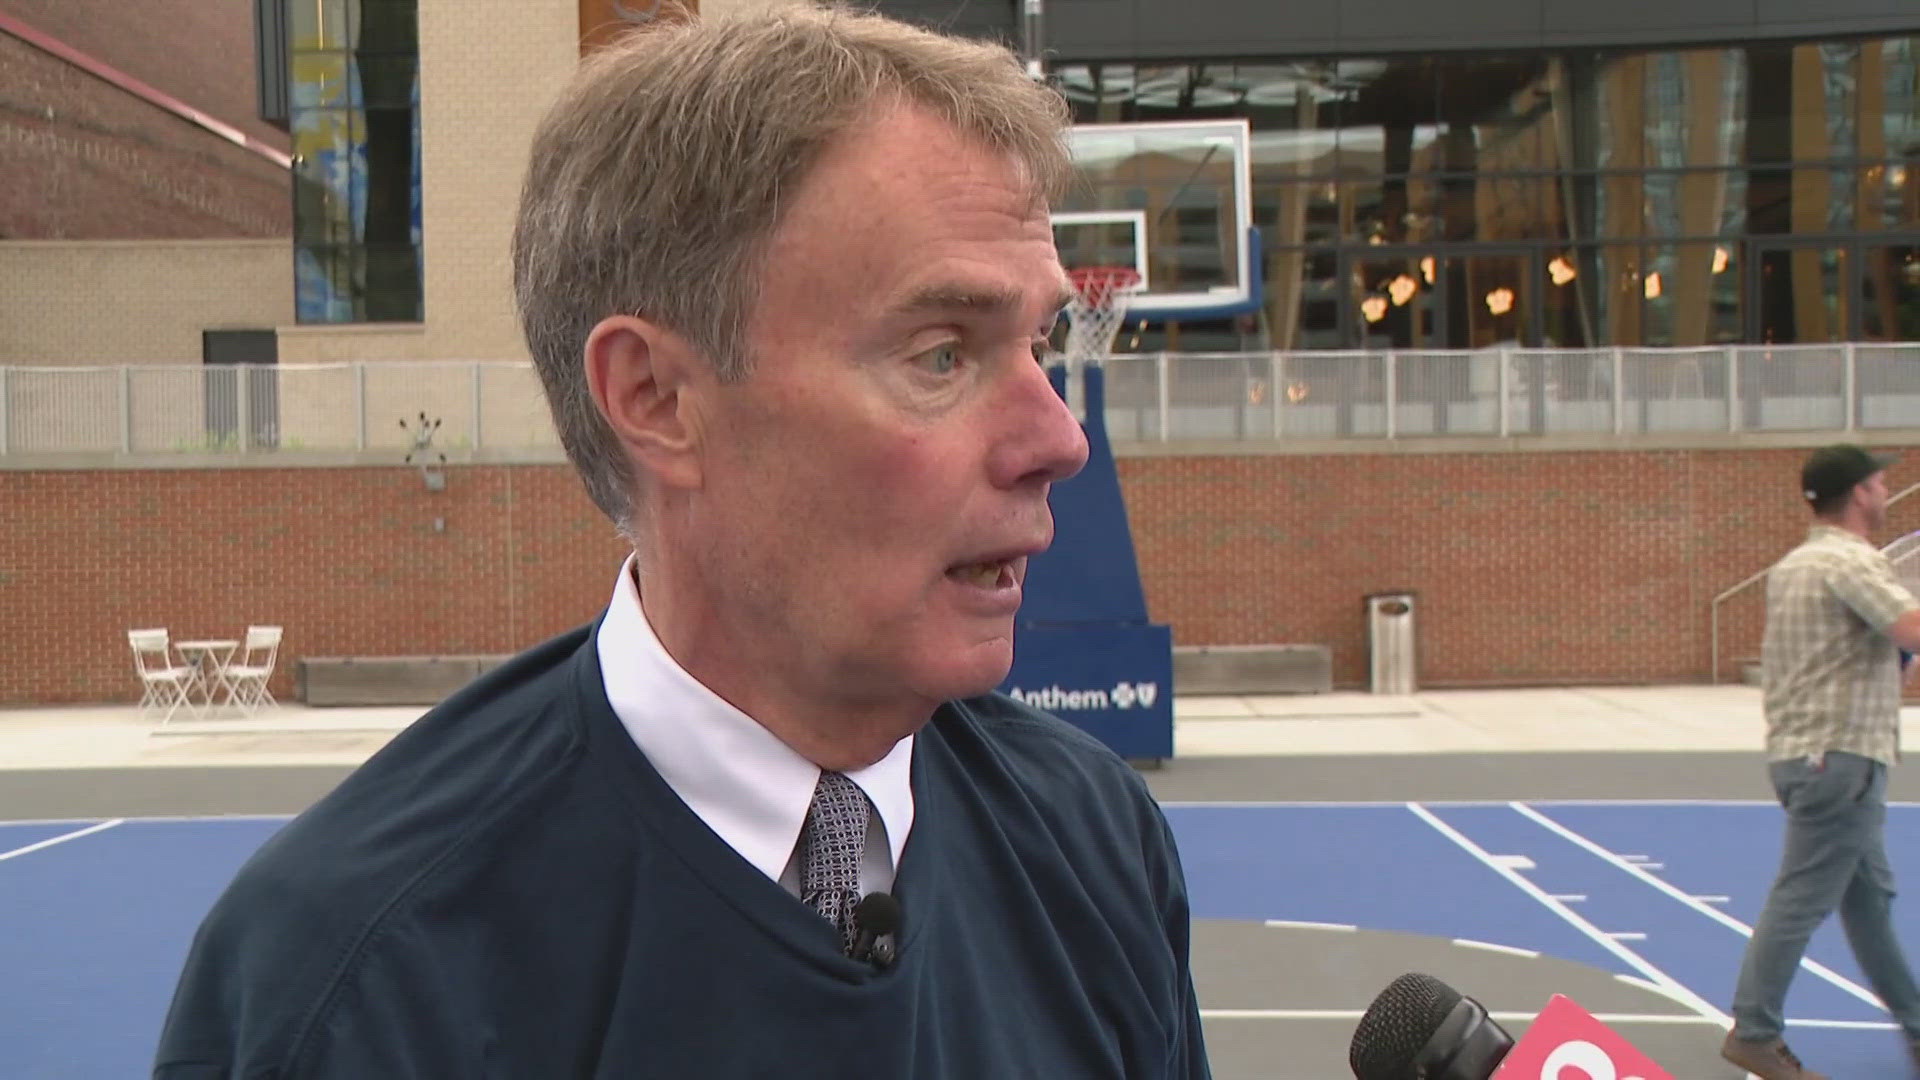 13News reporter Lauren Kostiuk talked with Indianapolis Mayor Joe Hogsett about his plans to bring an MLS franchise to the city.